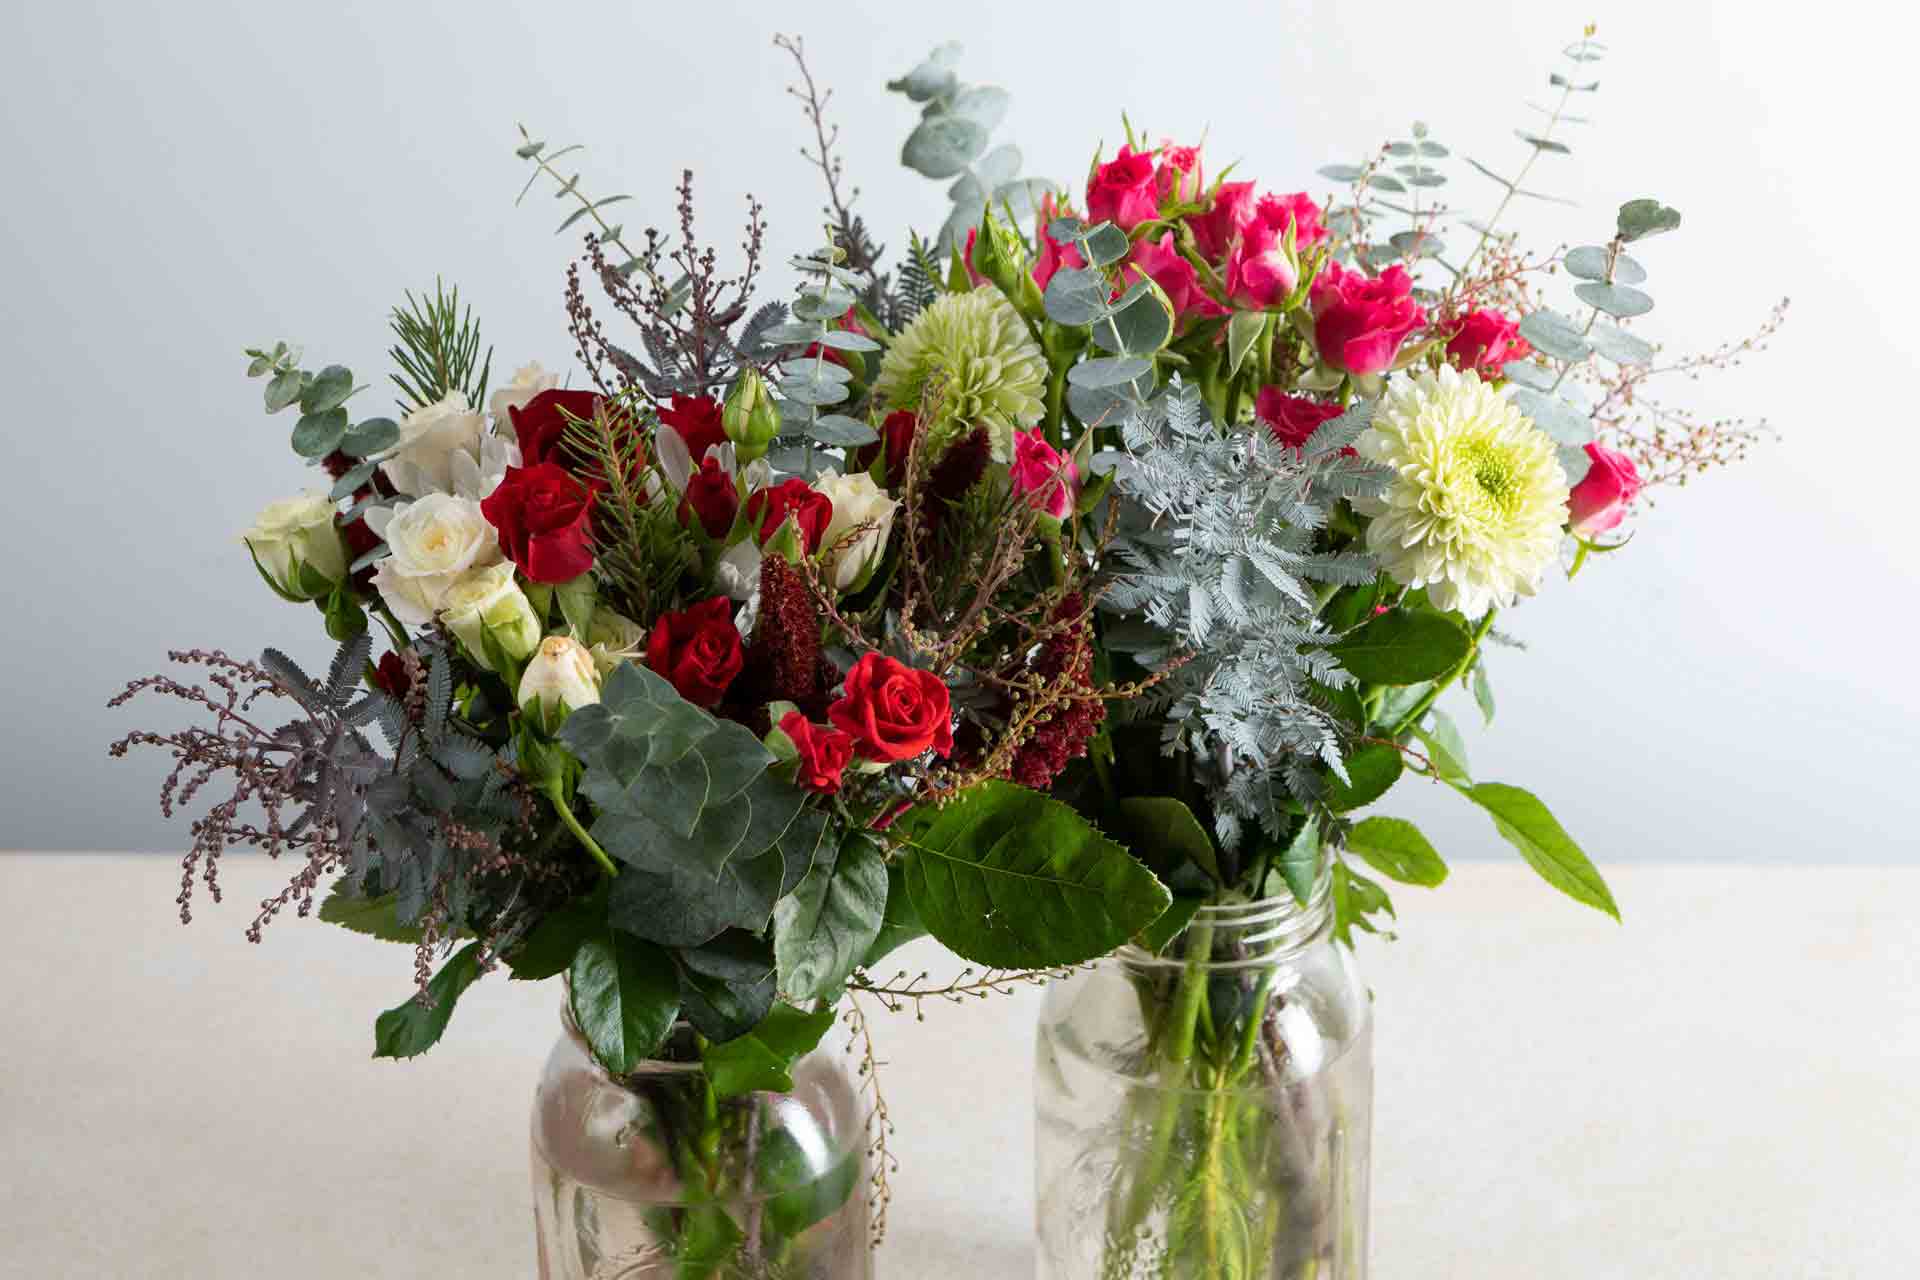 two holiday arrangements of flowers